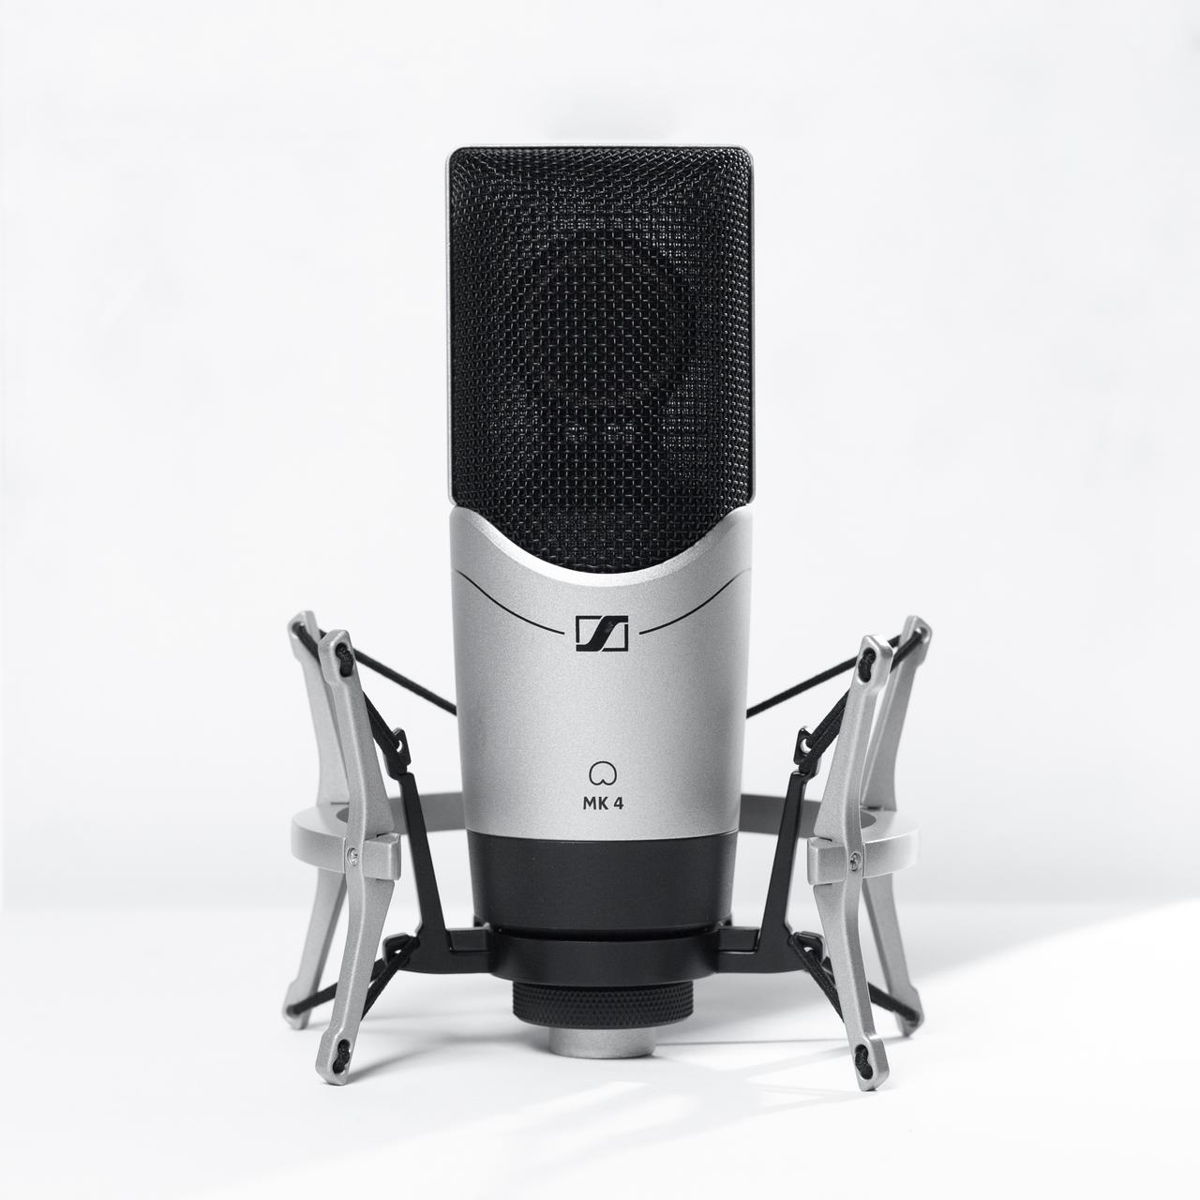 Sennheiser's MK 4 condenser microphone for home, project, and professional studios